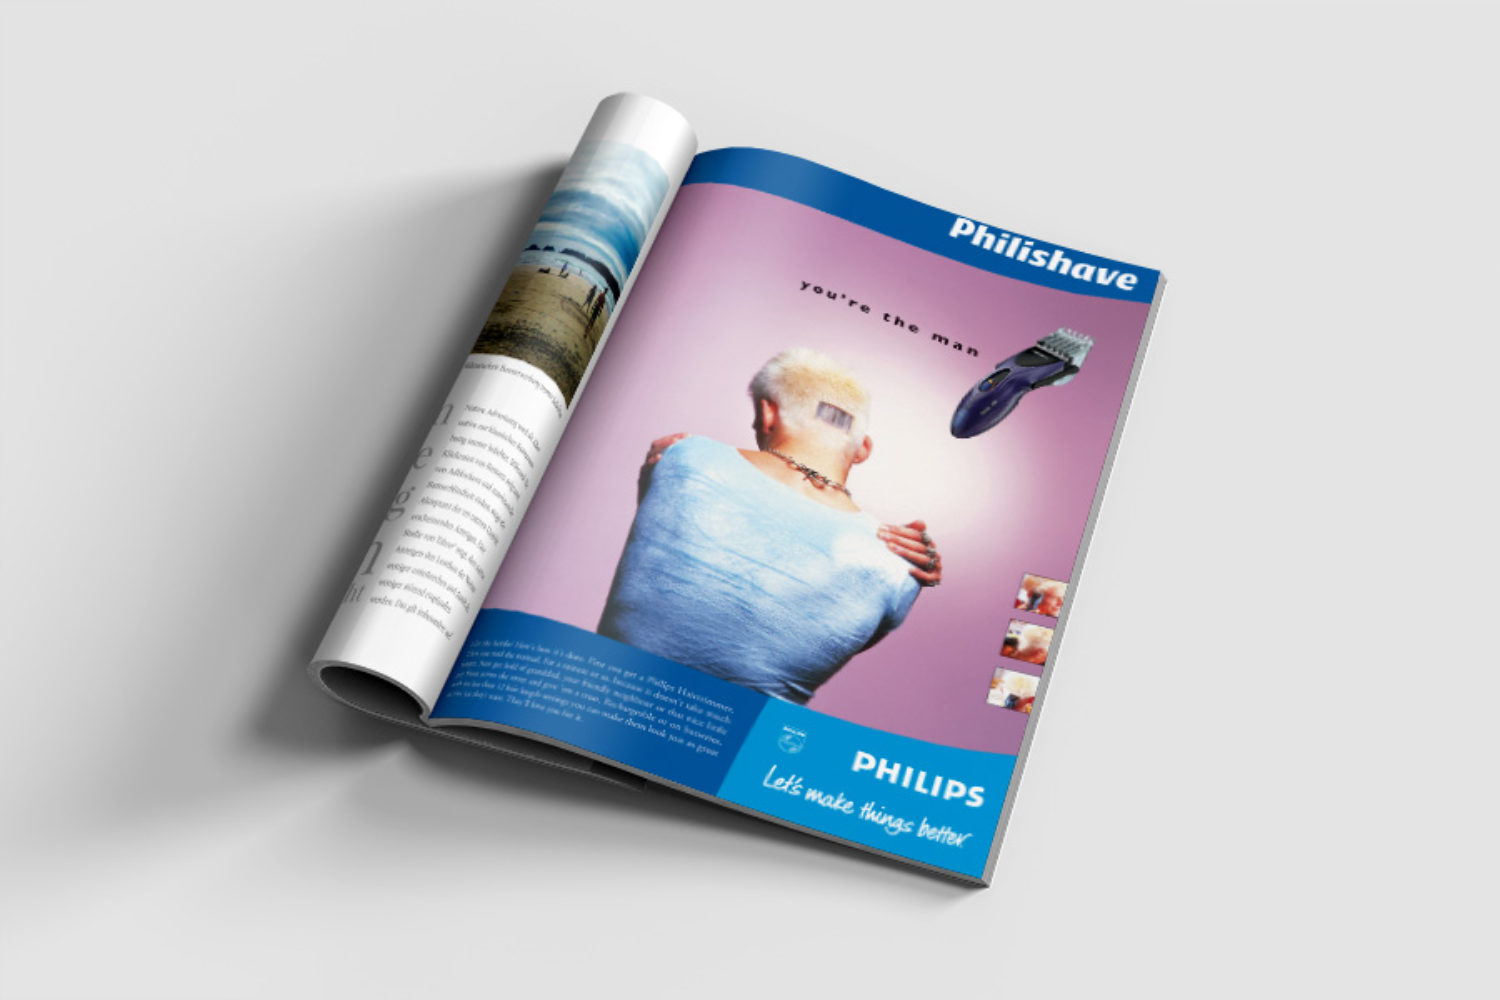 Philips Haircutter